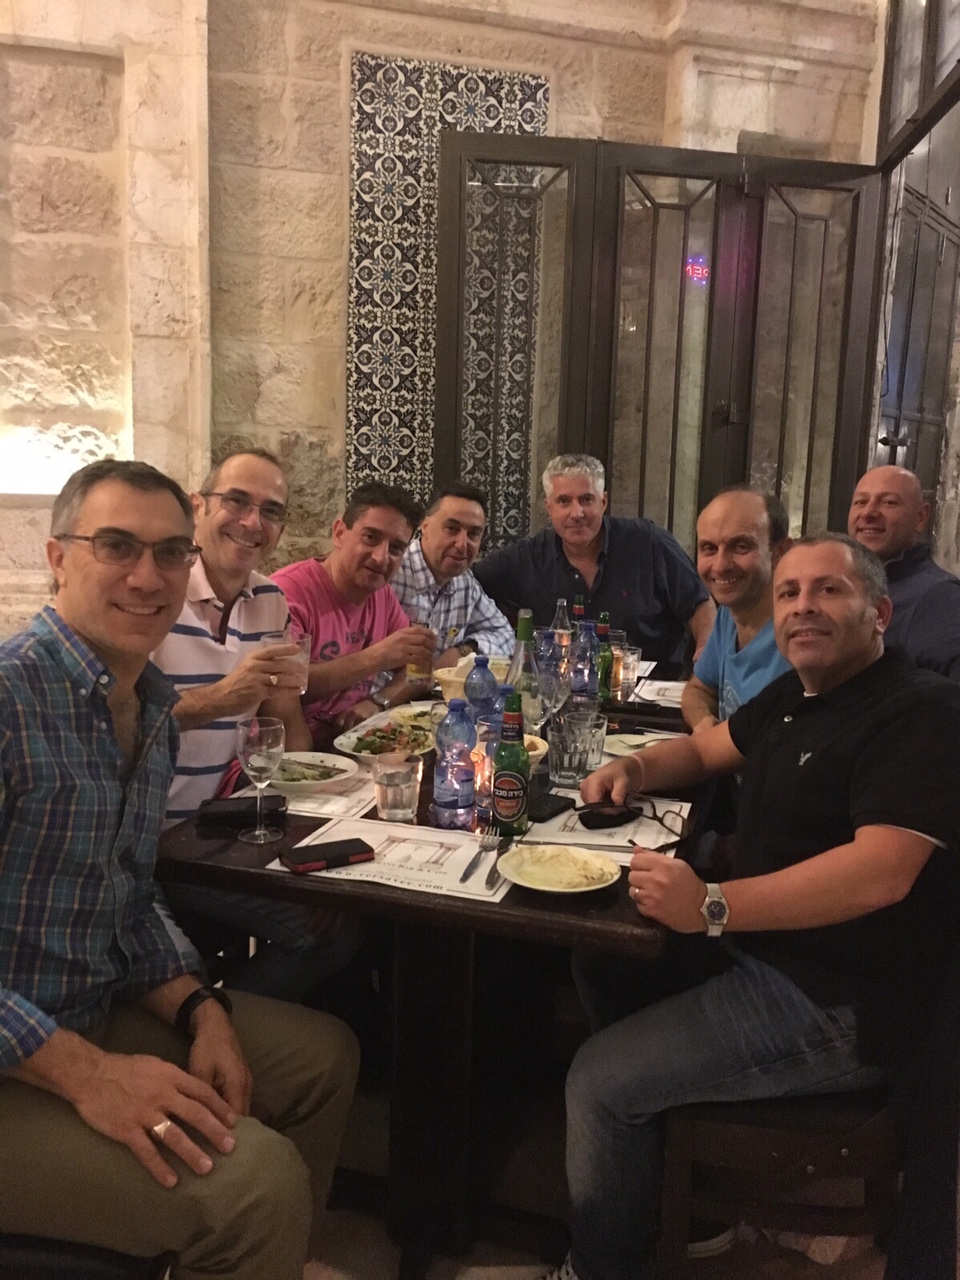 Friday 9 October – Travel Day and Friday Night at The Western Wall